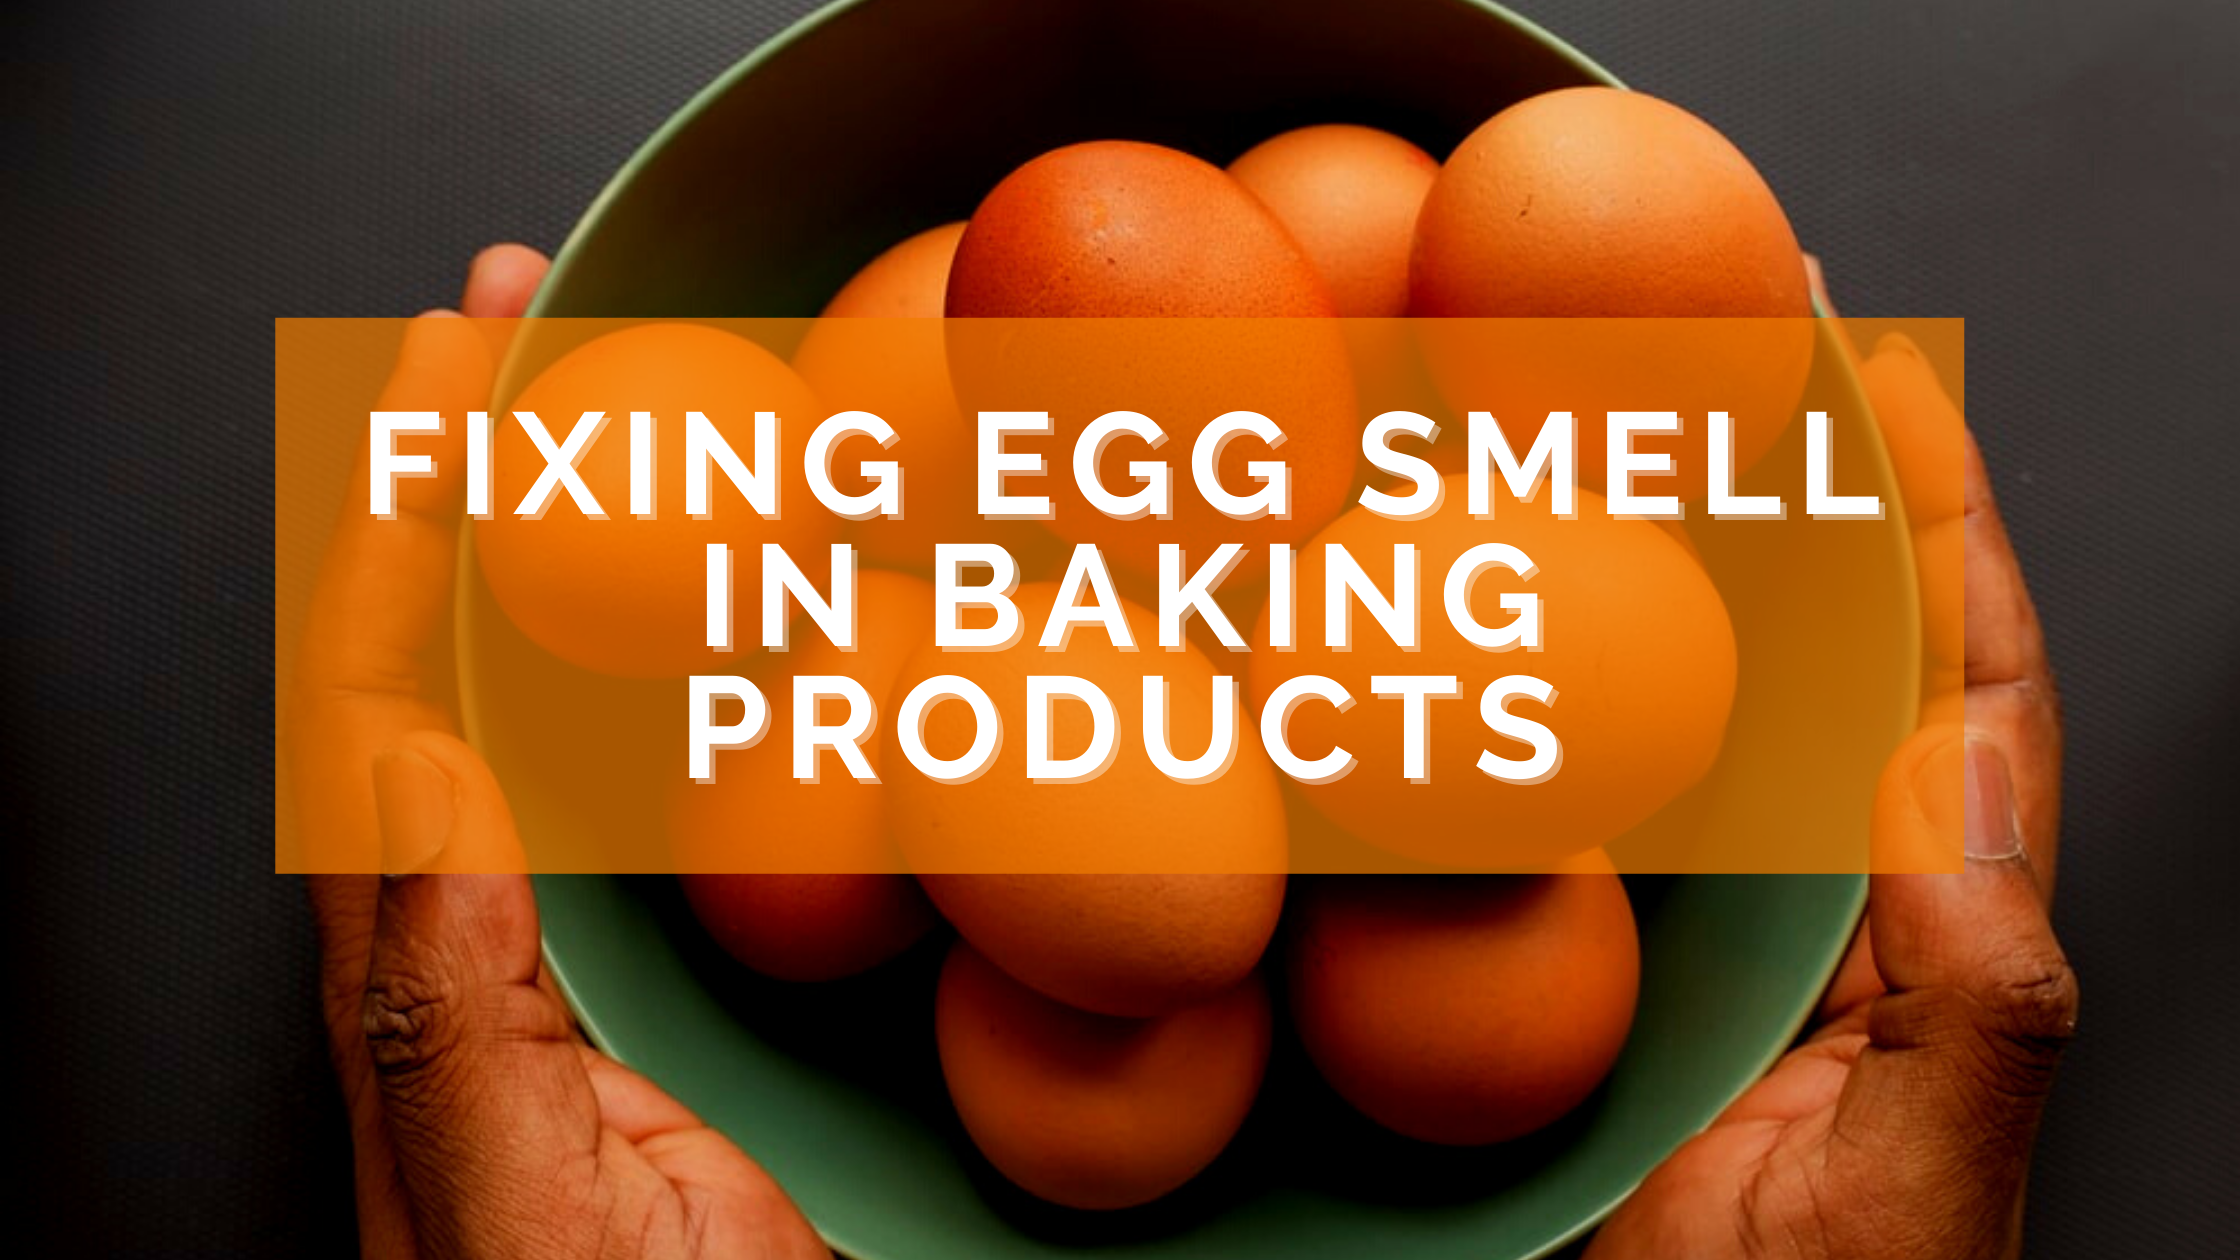 Fixing Egg Smell in Baking Products Banner